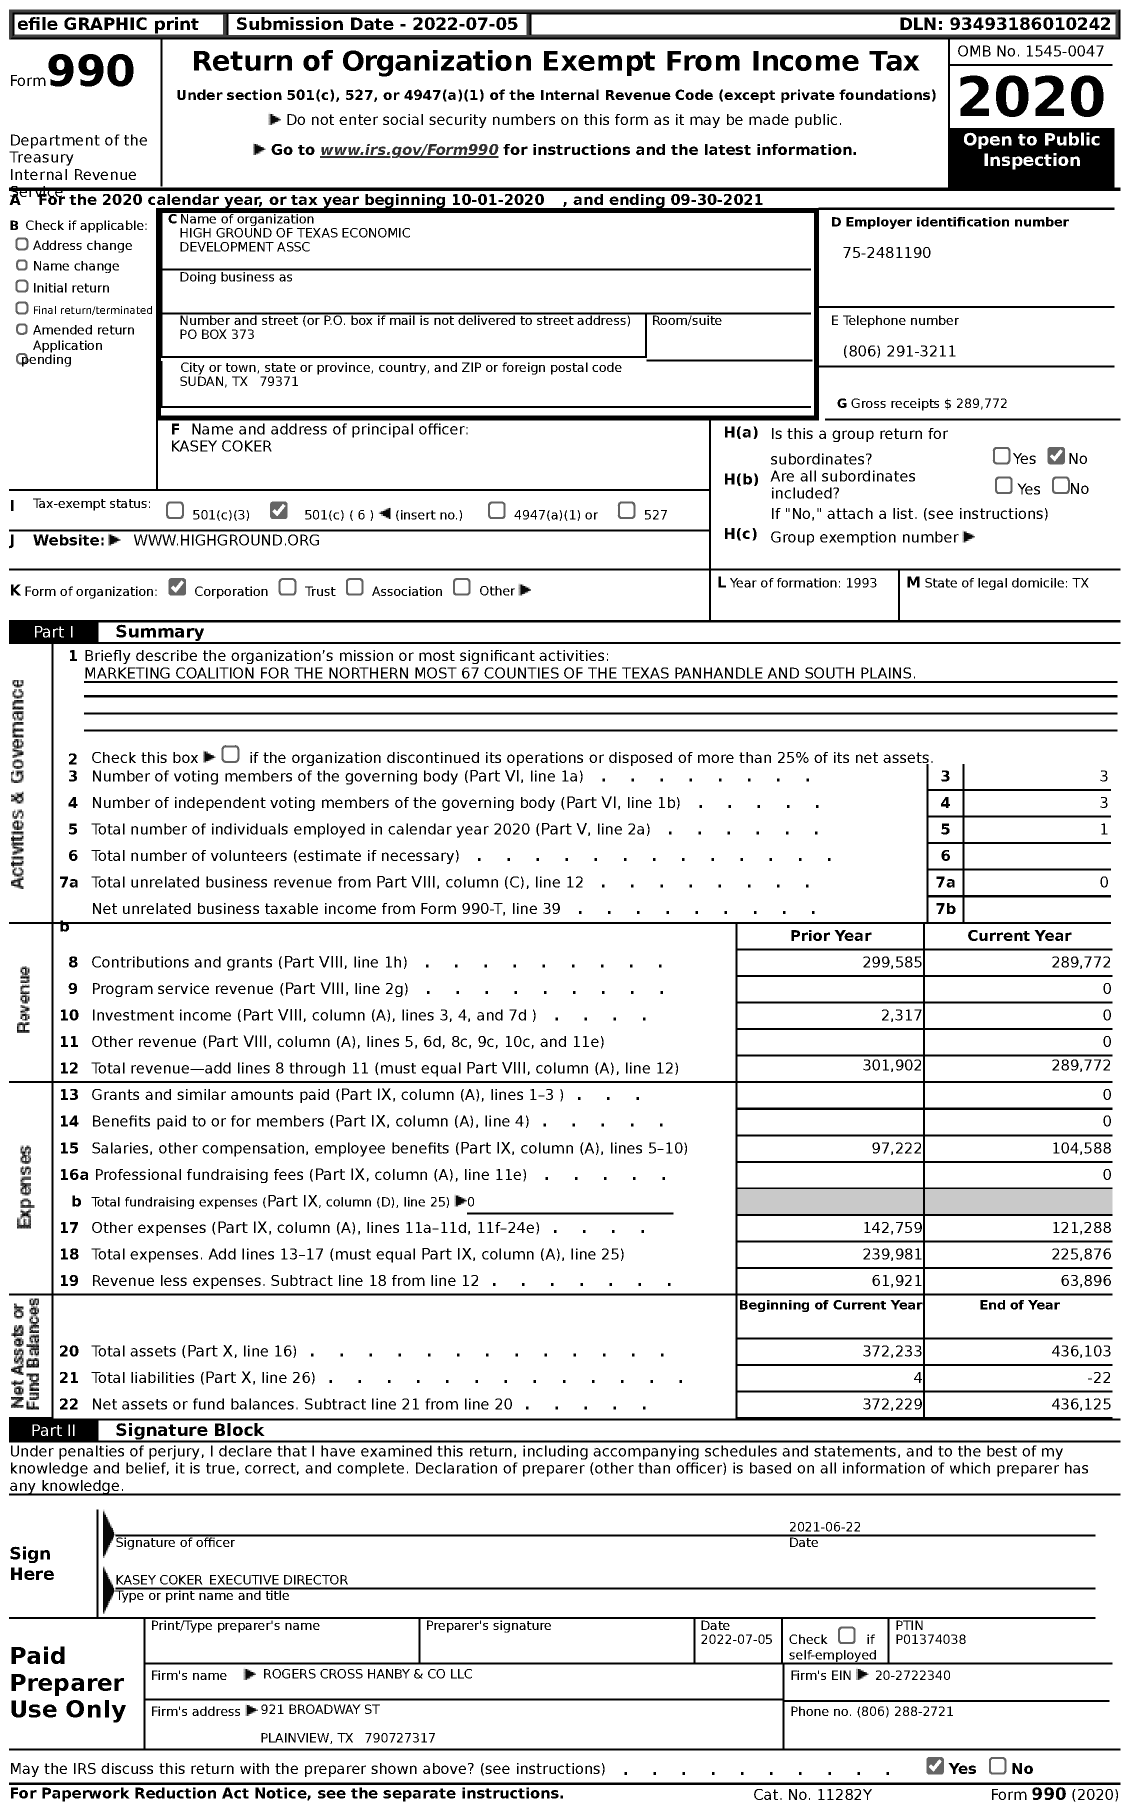 Image of first page of 2020 Form 990 for High Ground of Texas Economic Development Association